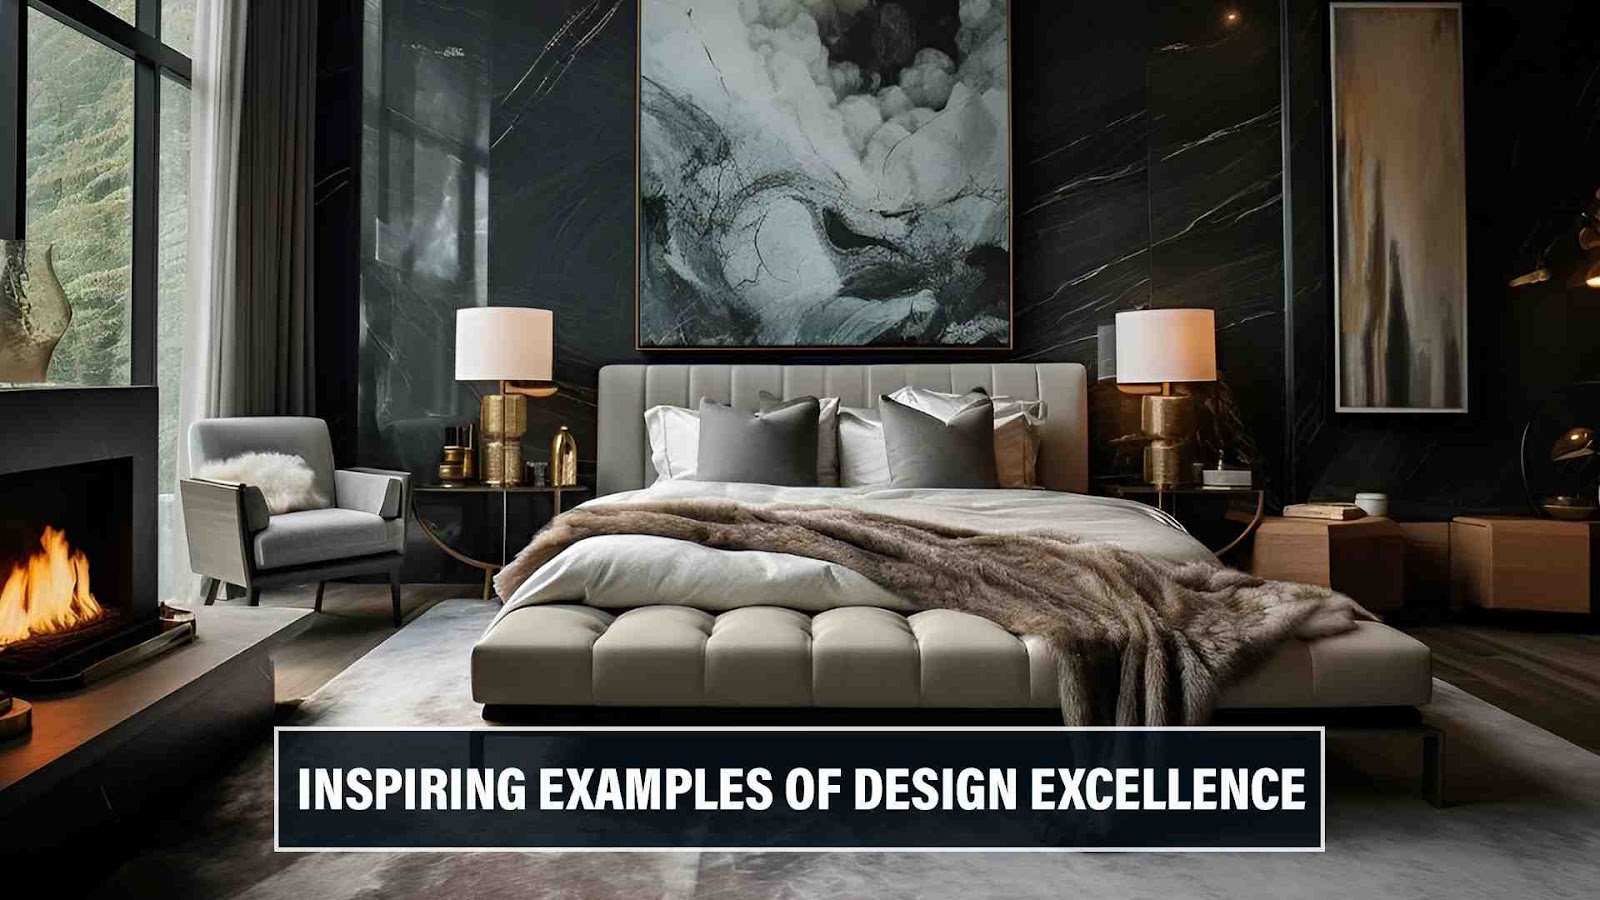 Coolest Bedrooms: Inspiring Examples of Design Excellence